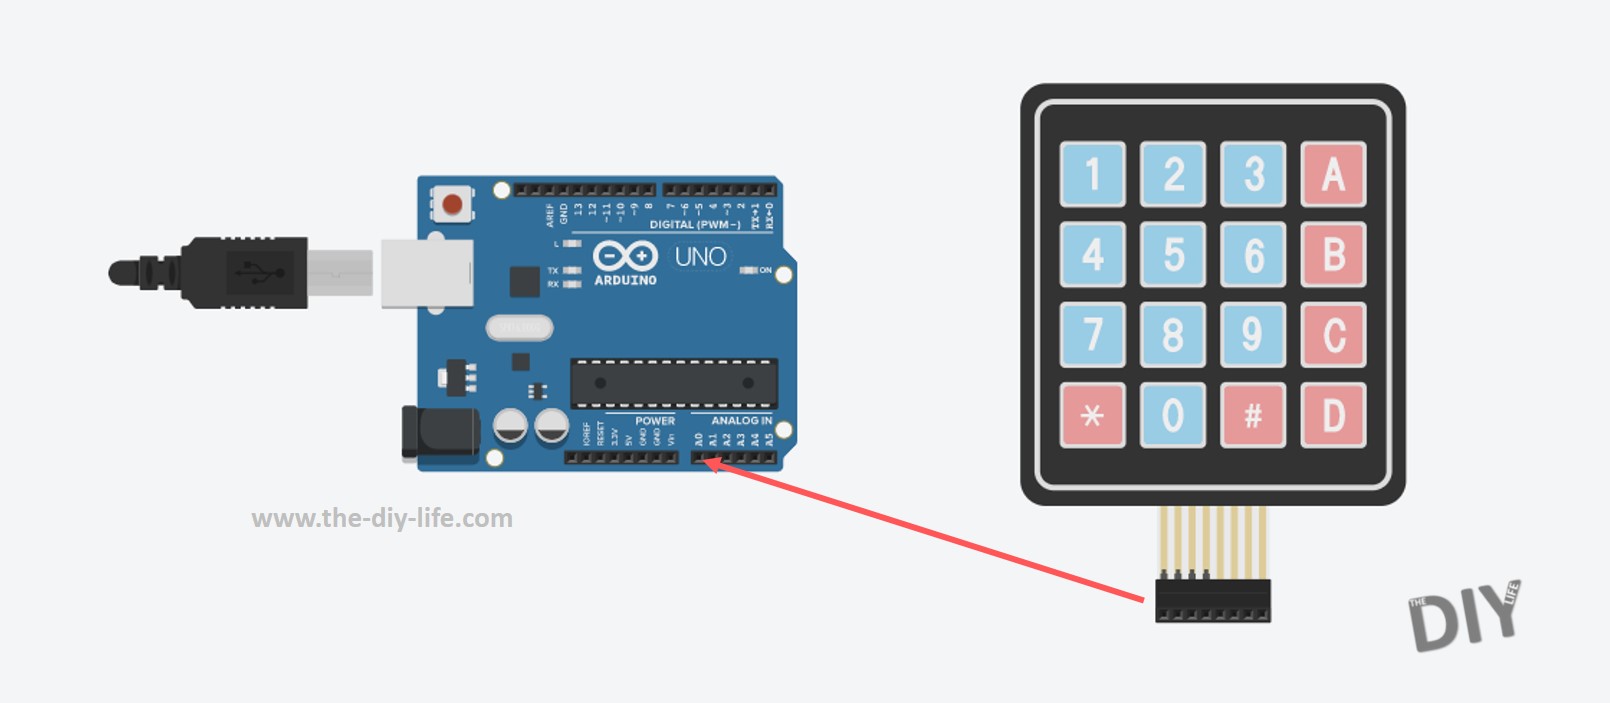 Connect A 4x4 Keypad To One Arduino Input